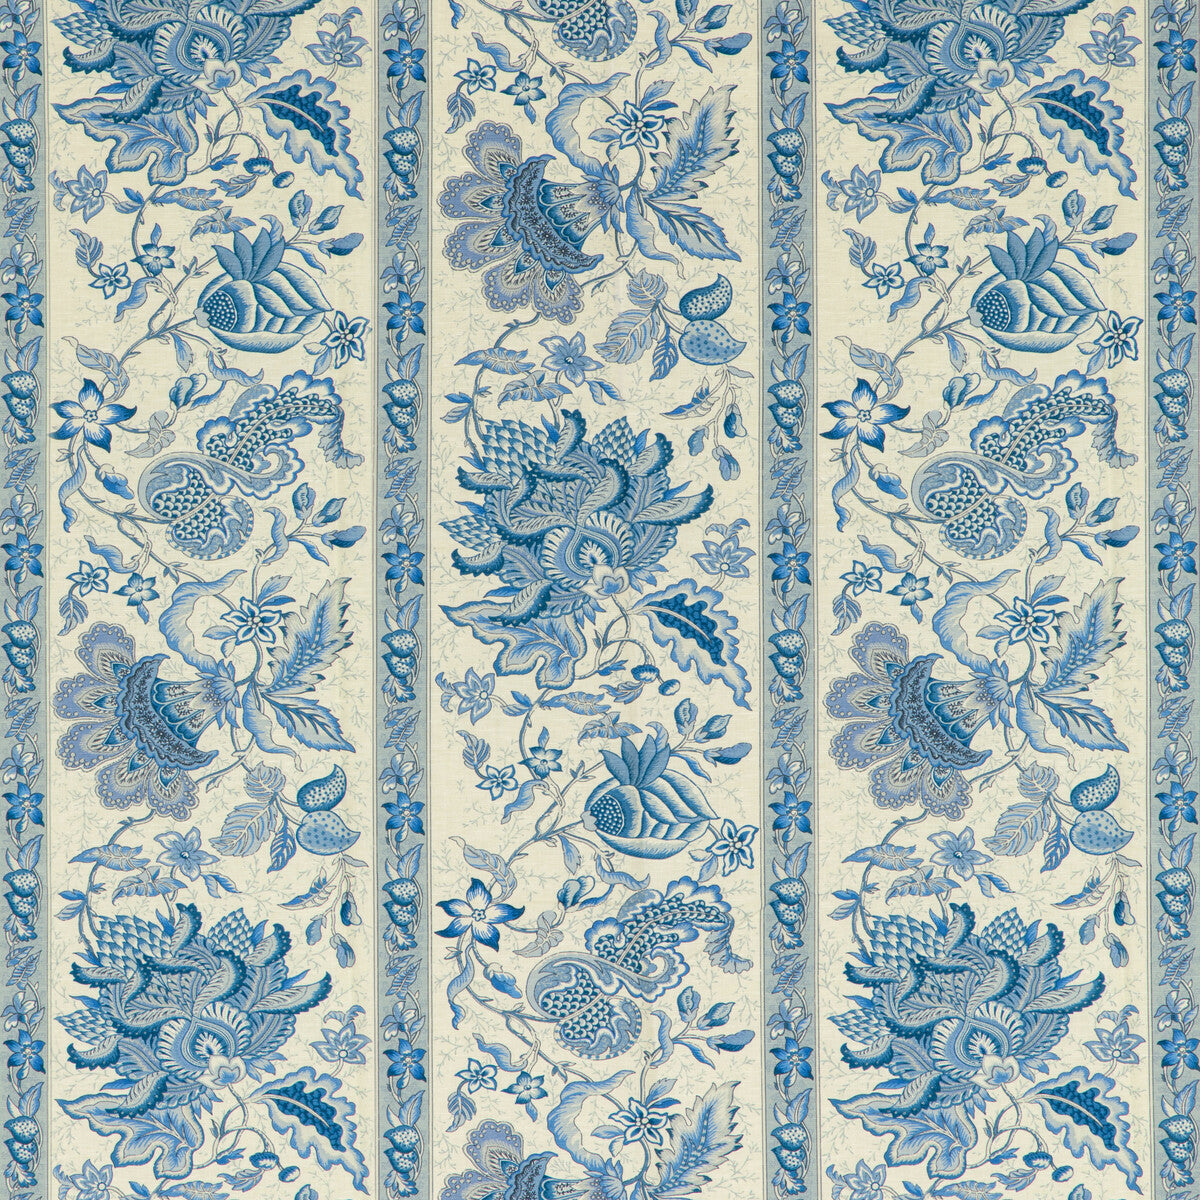 Montflours Print fabric in blue color - pattern 8020120.5.0 - by Brunschwig &amp; Fils in the Louverne collection